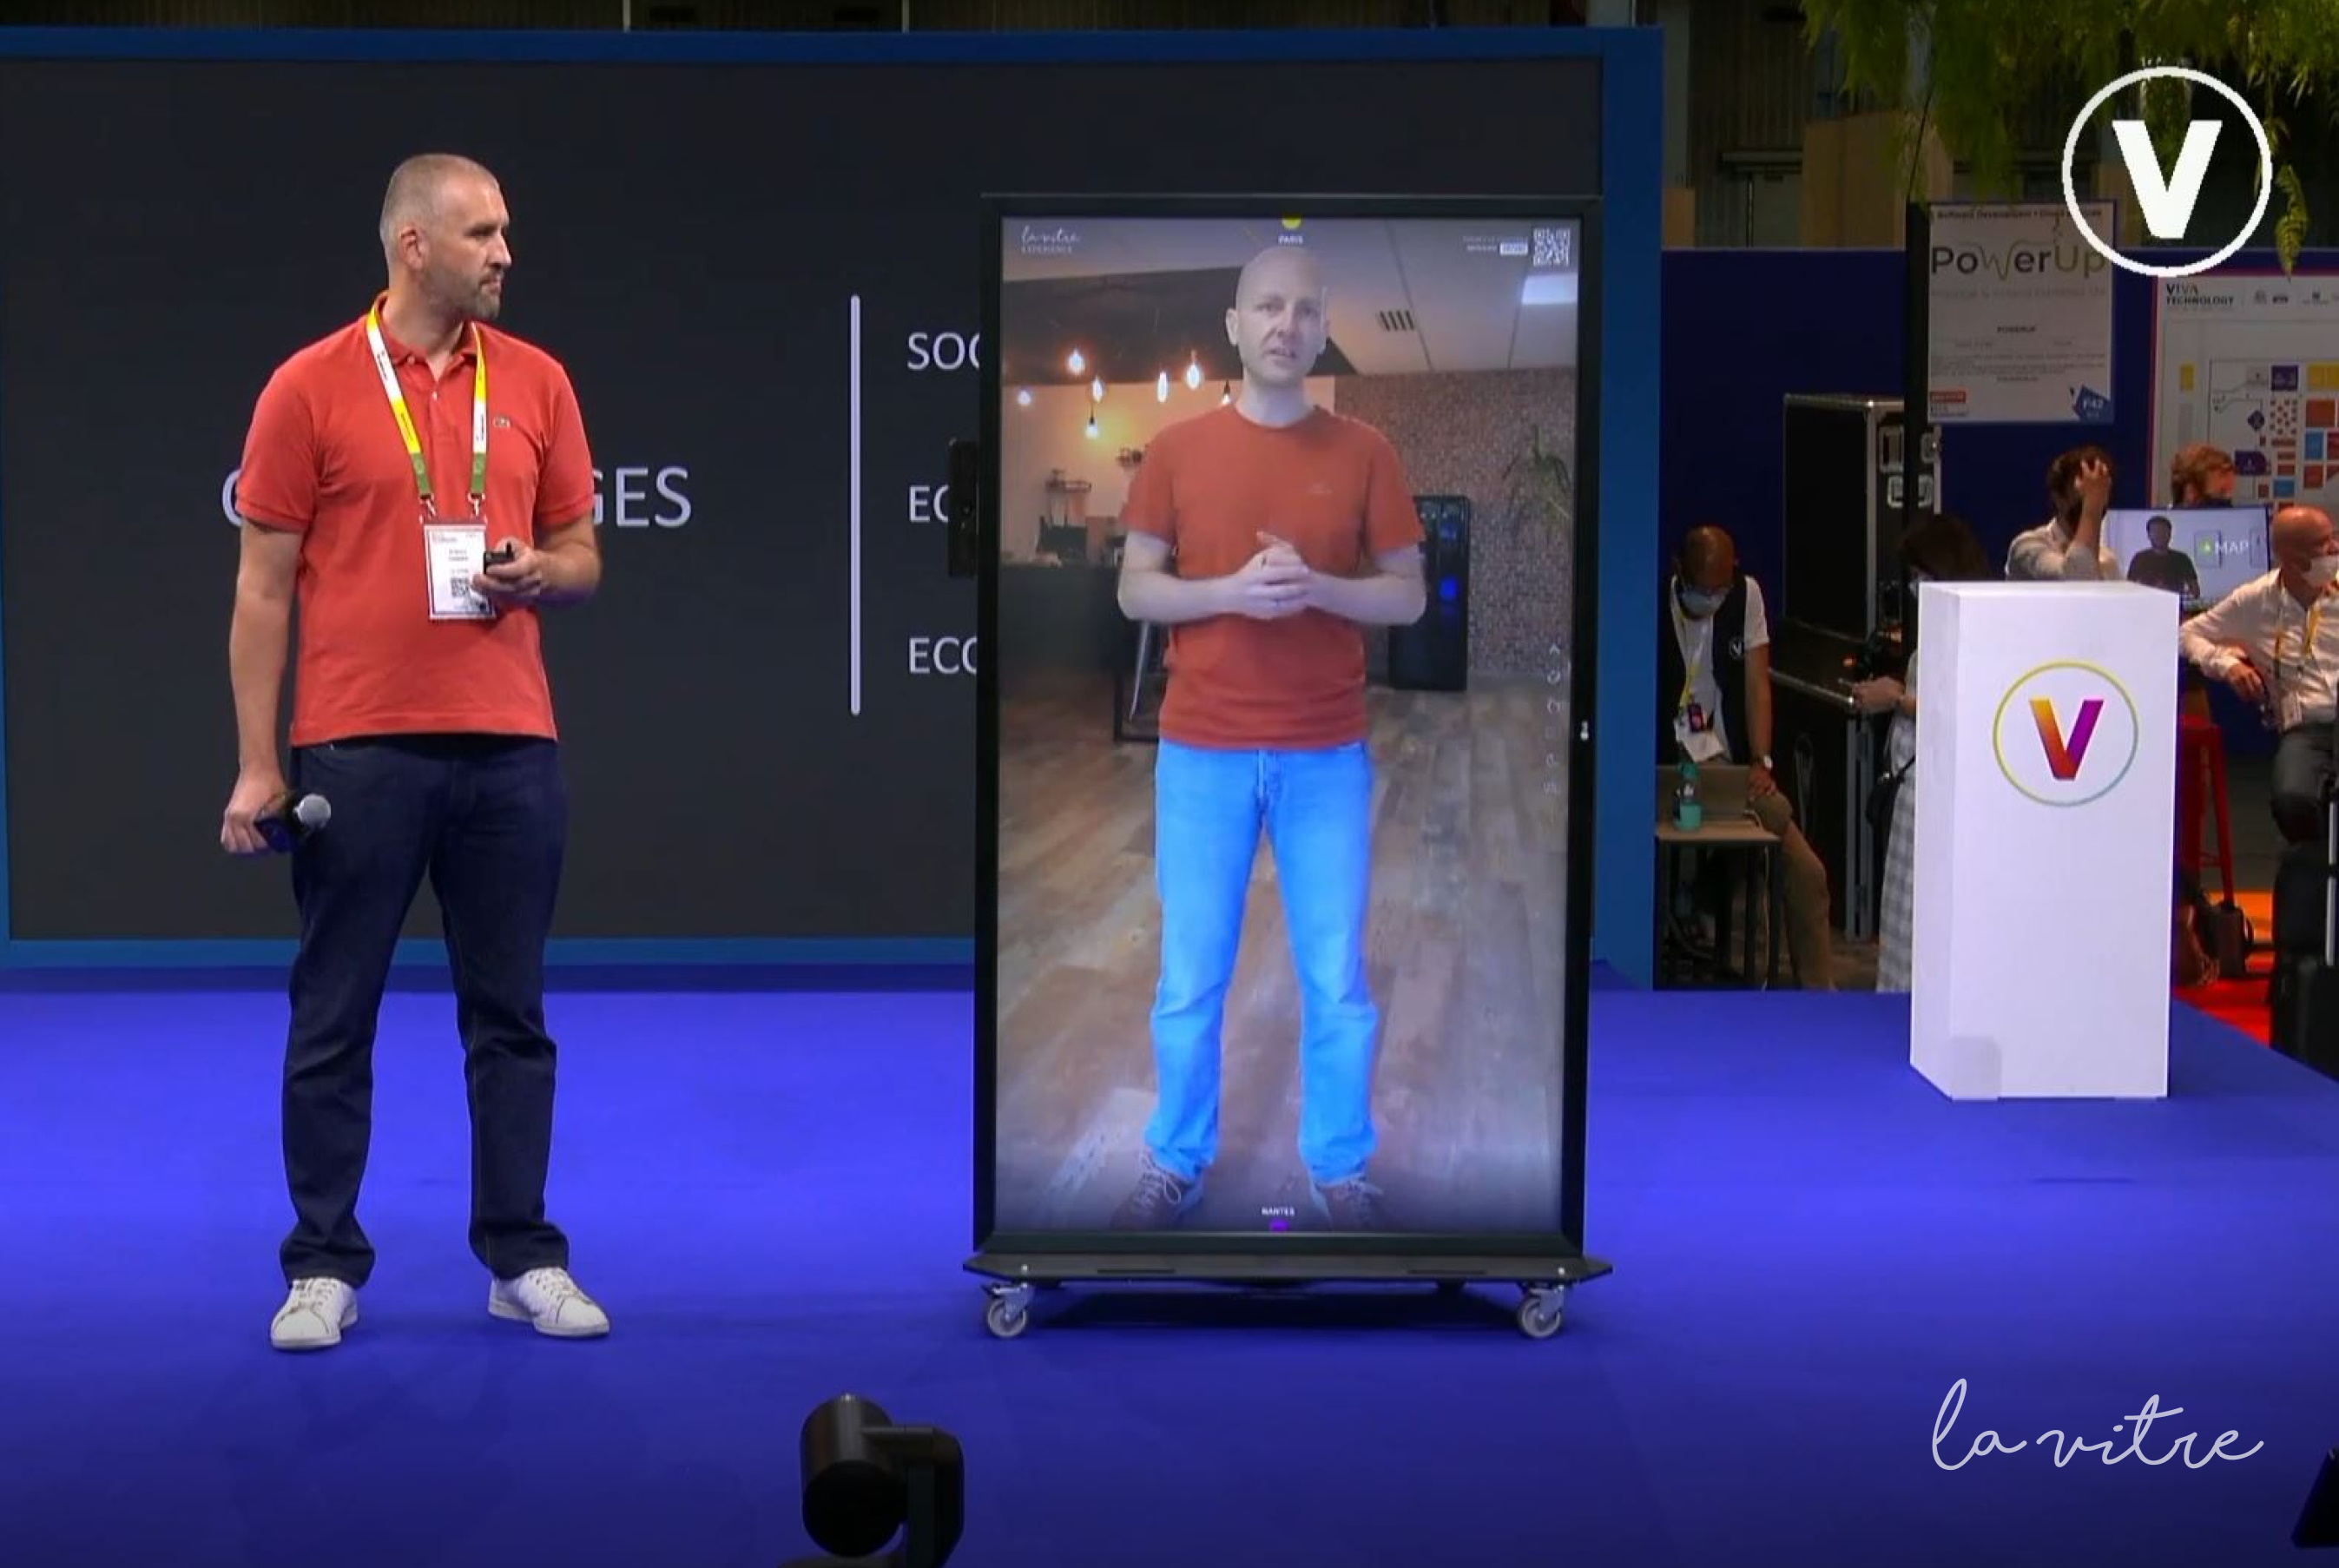 A life-sized image of a person on a video screen doing a video call.